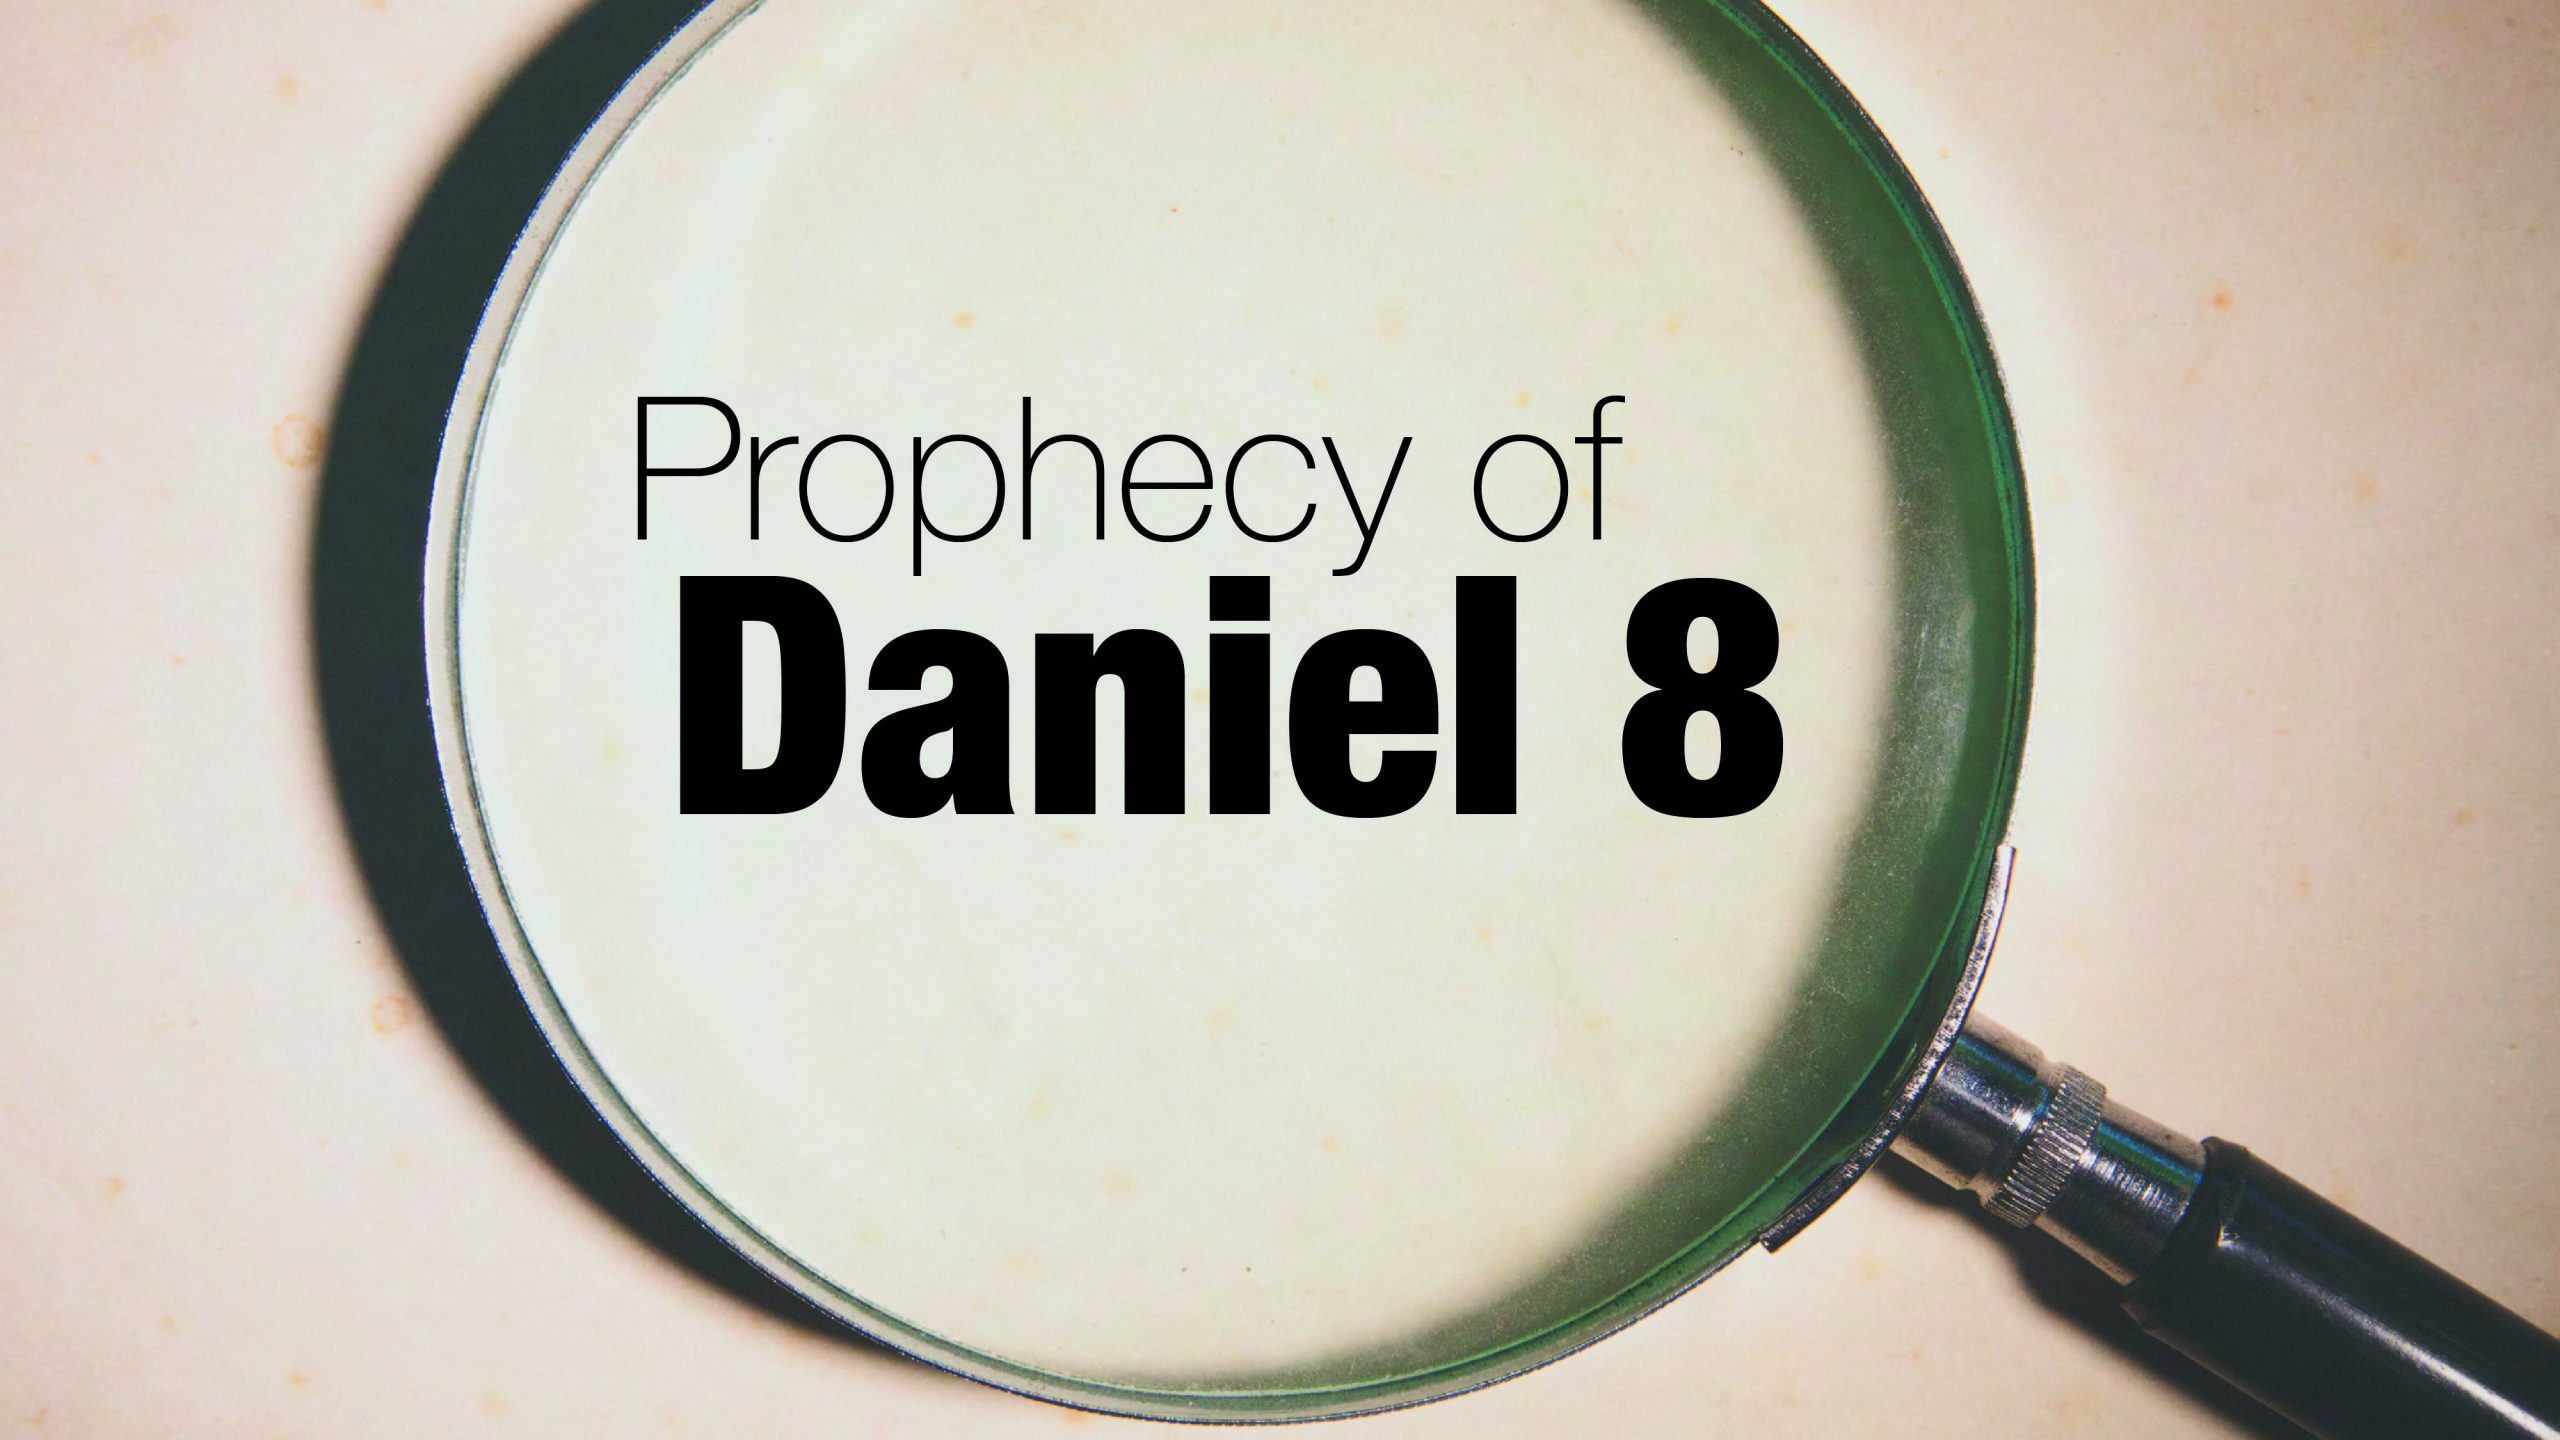 The Prophecy of Daniel 8